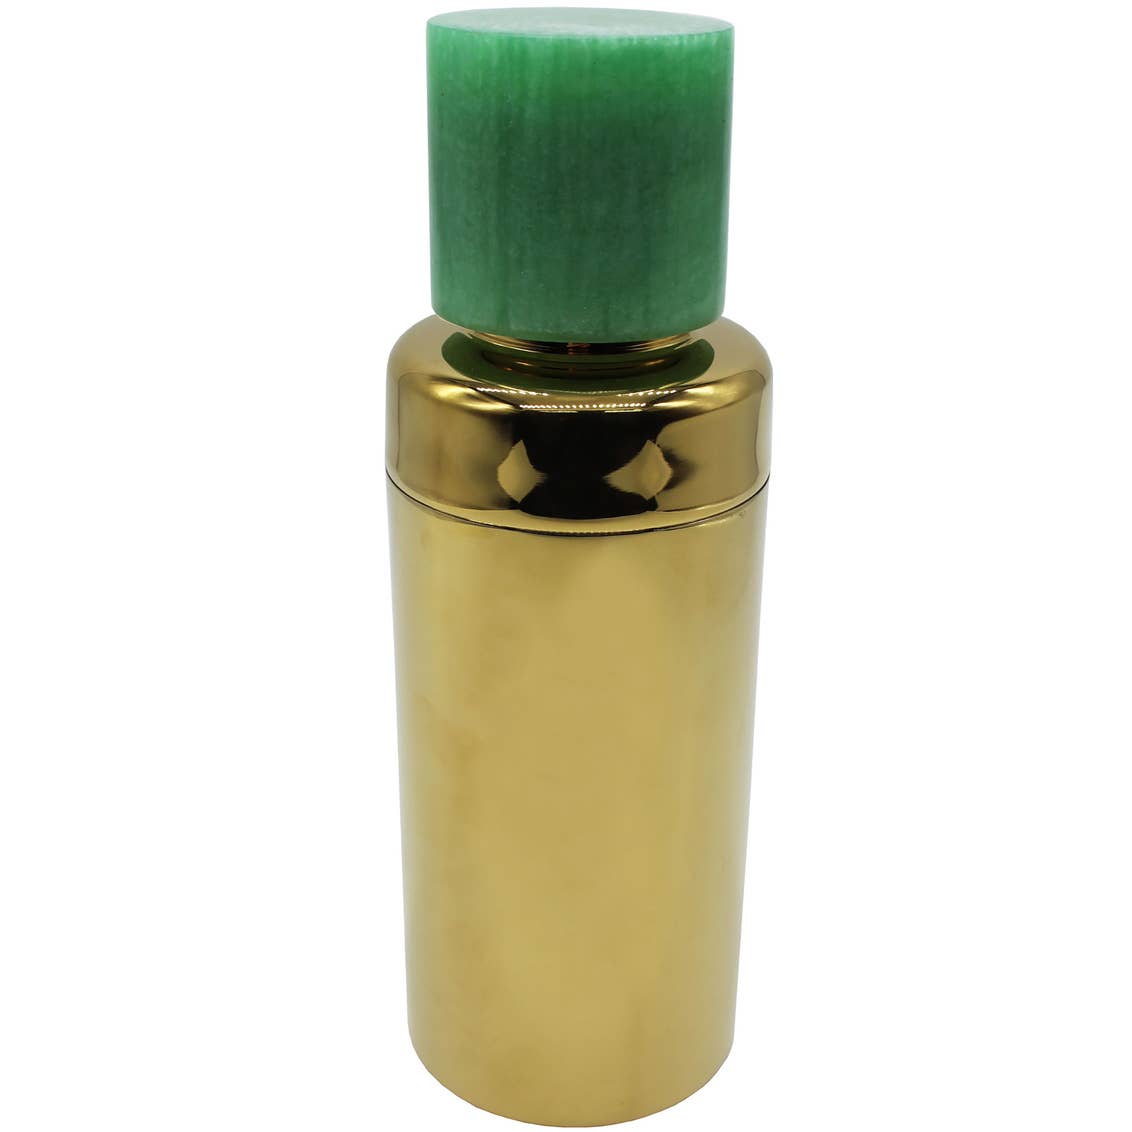 Hyaline Green Resin and Gold Shaker